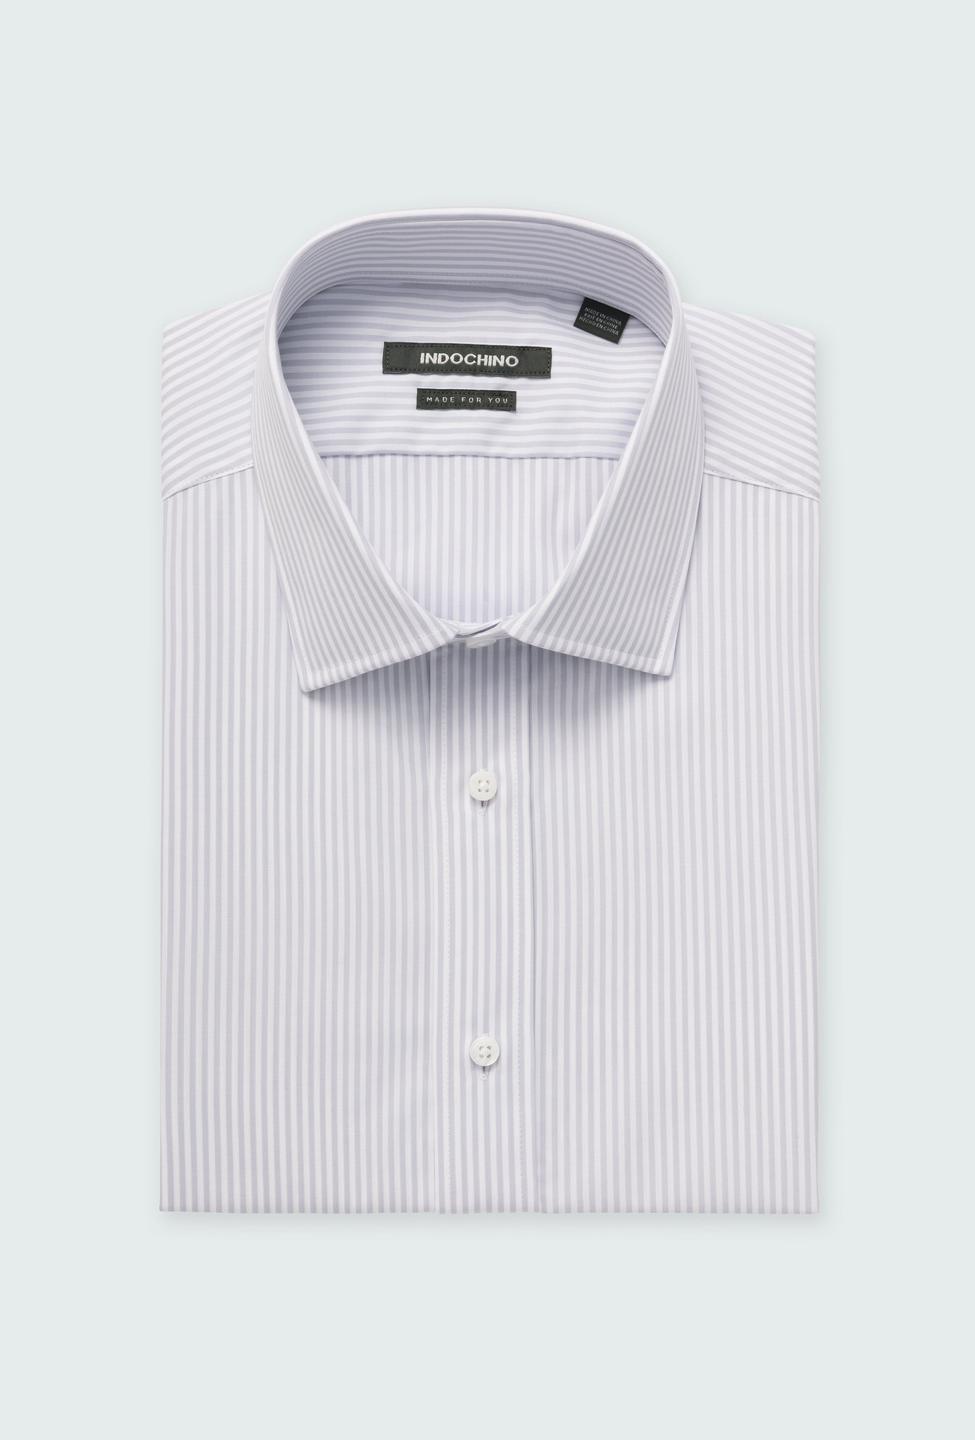 Gray shirt - Helston Striped Design from Premium Indochino Collection